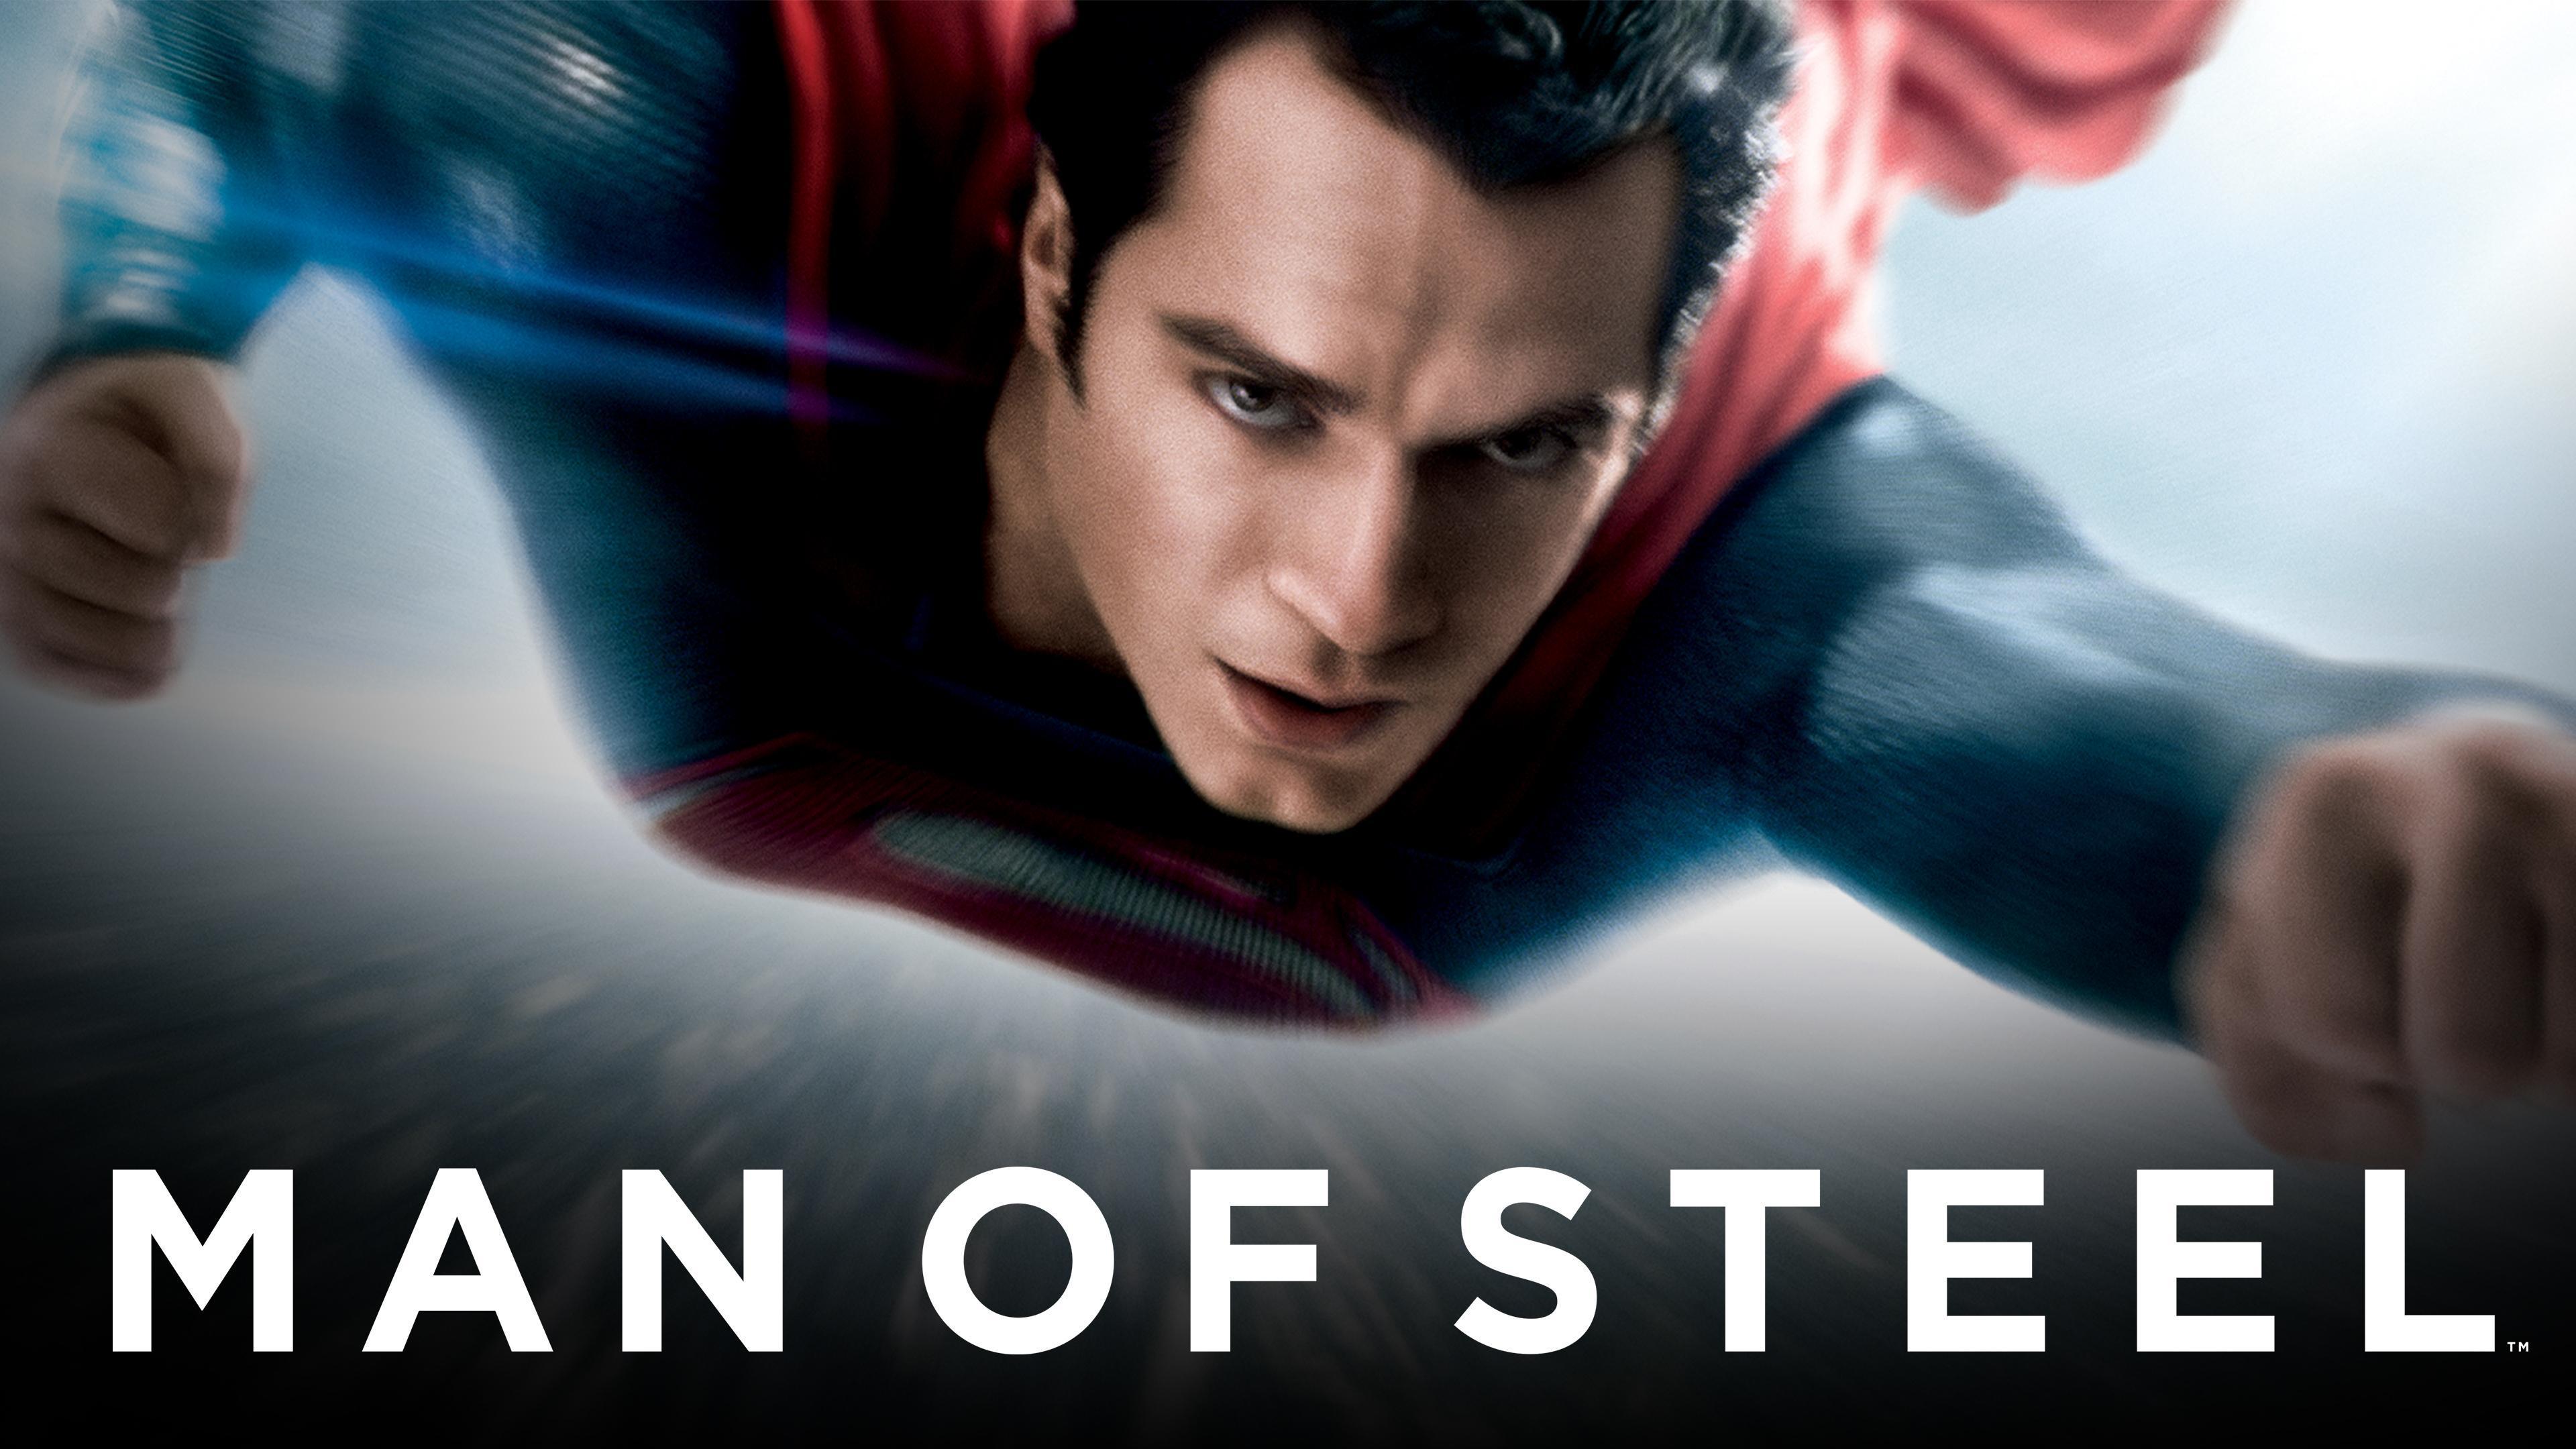 Superman Movies: All 9 Man of Steel Flims, Ranked